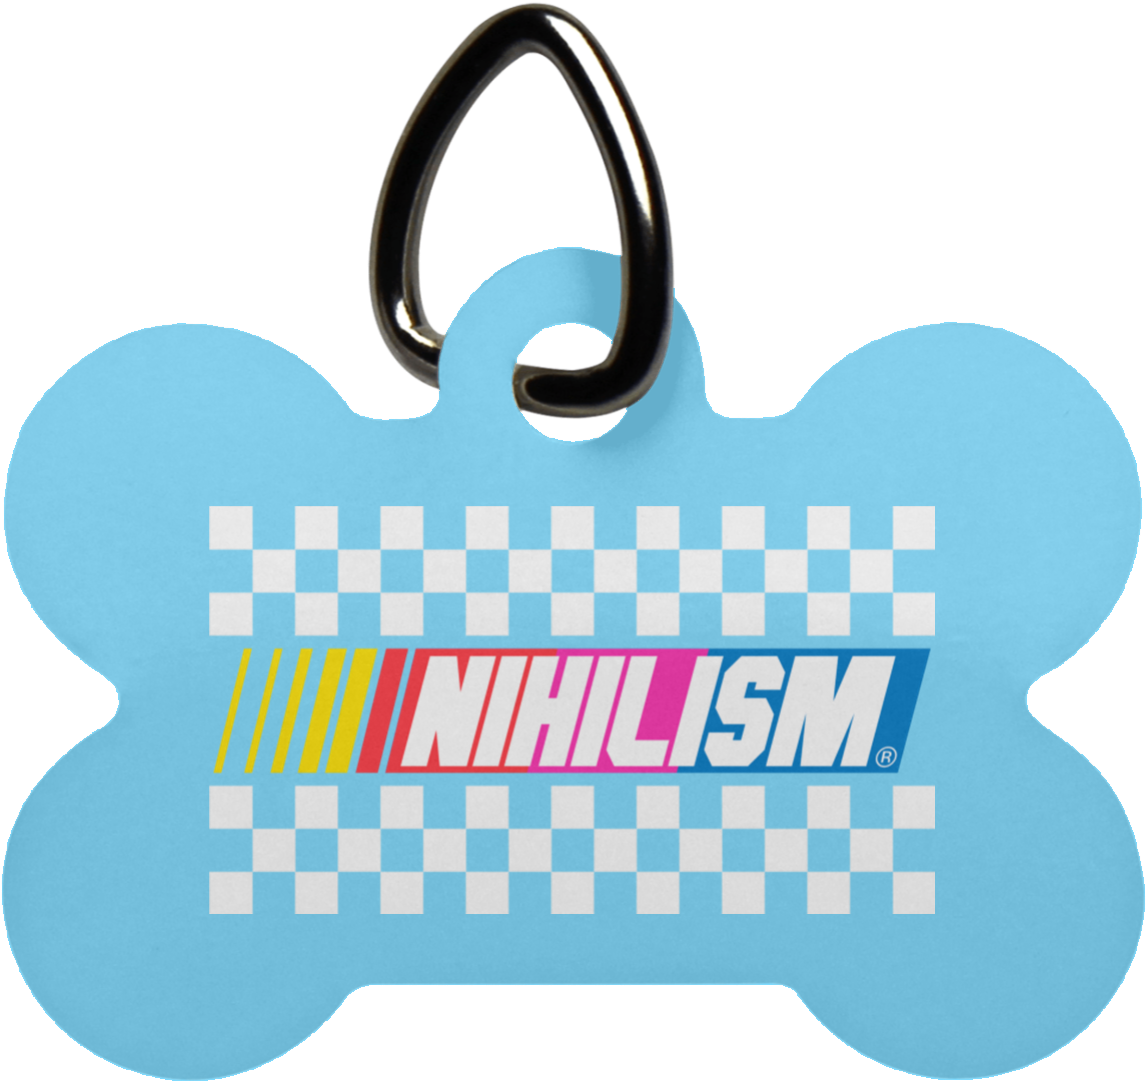 A Blue Tag With White And Blue Design